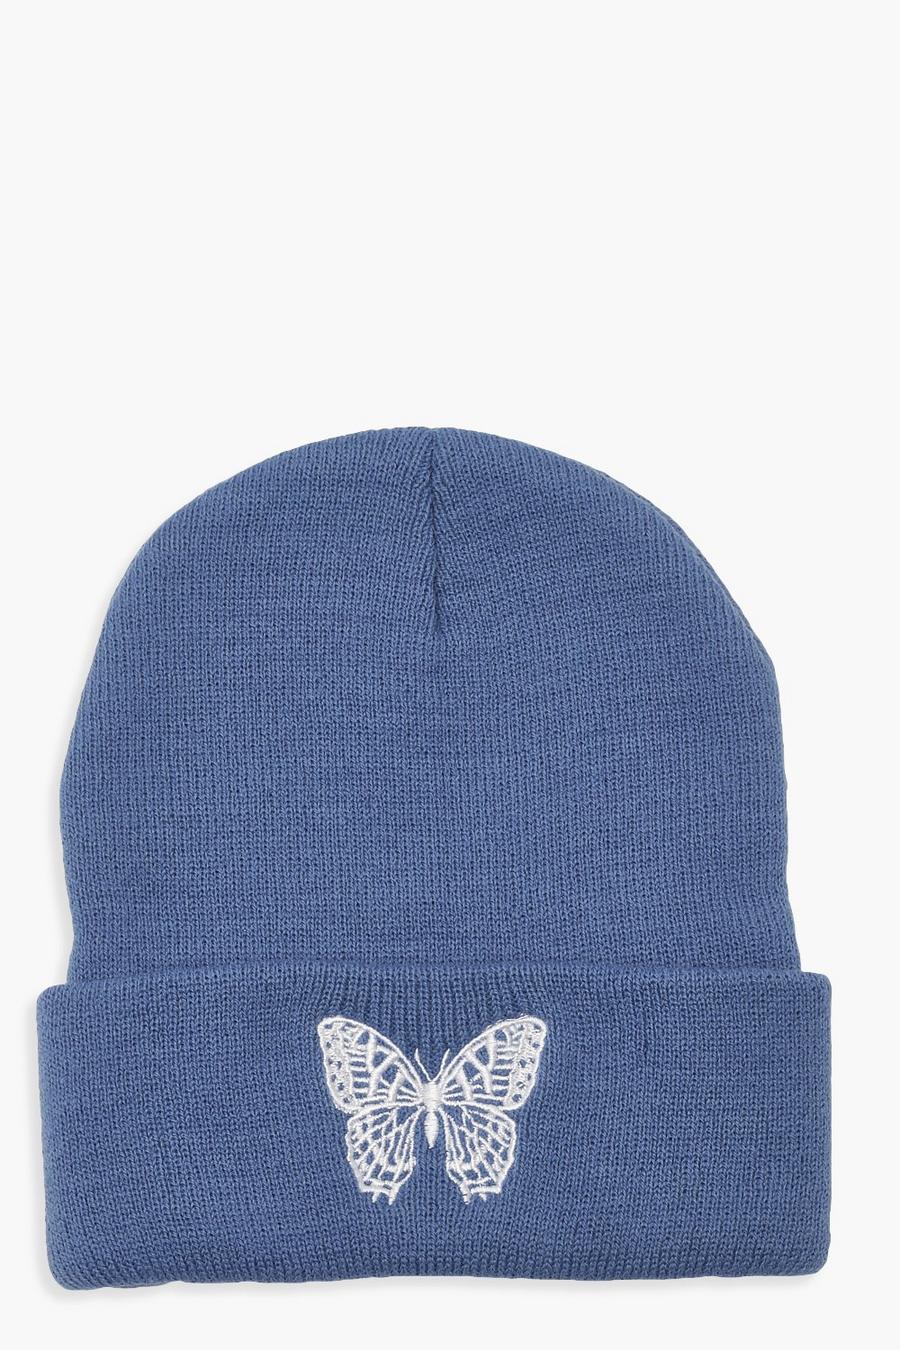 Embroidered Butterfly Beanie image number 1